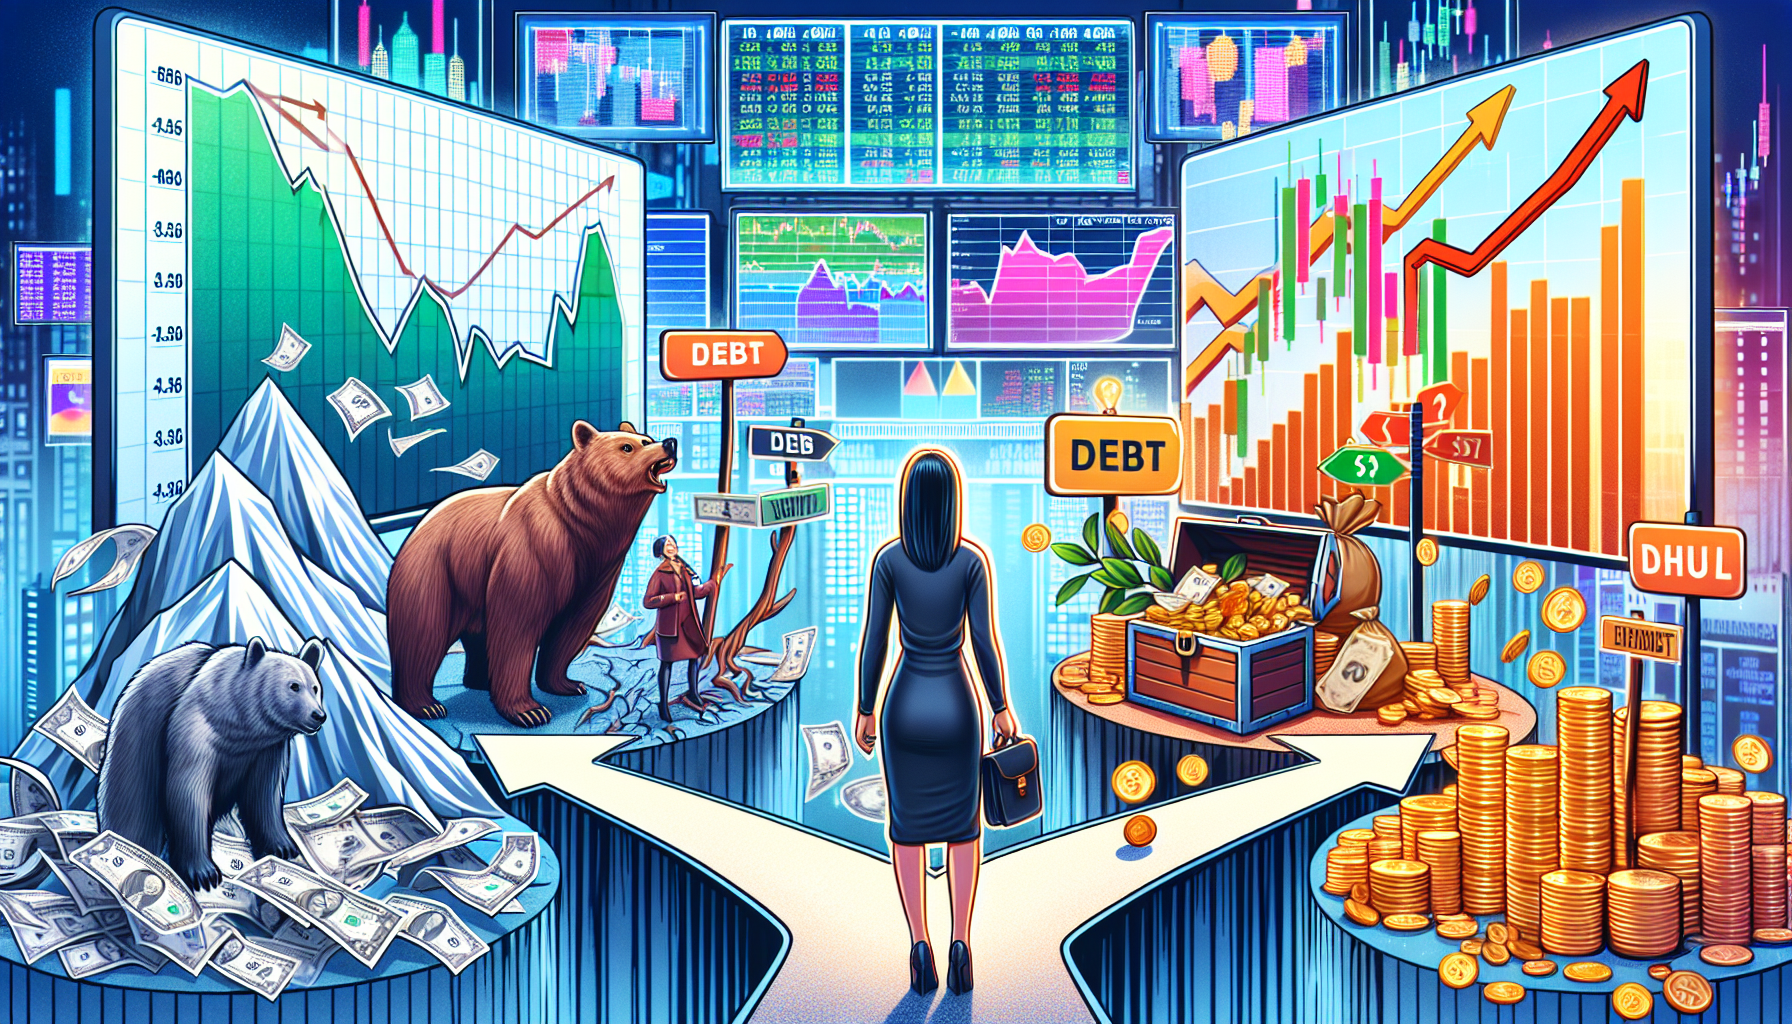 Create an image of a stock market investor standing at a crossroads. One path is marked 'Risks' with visuals such as a steep cliff, debt documents, and a bear market graph. The other path is marked 'Rewards' with images like a bull market chart, a treasure chest overflowing with money, and a rising stock graph. The background should be a bustling stock trading floor with screens showing real-time stock prices.